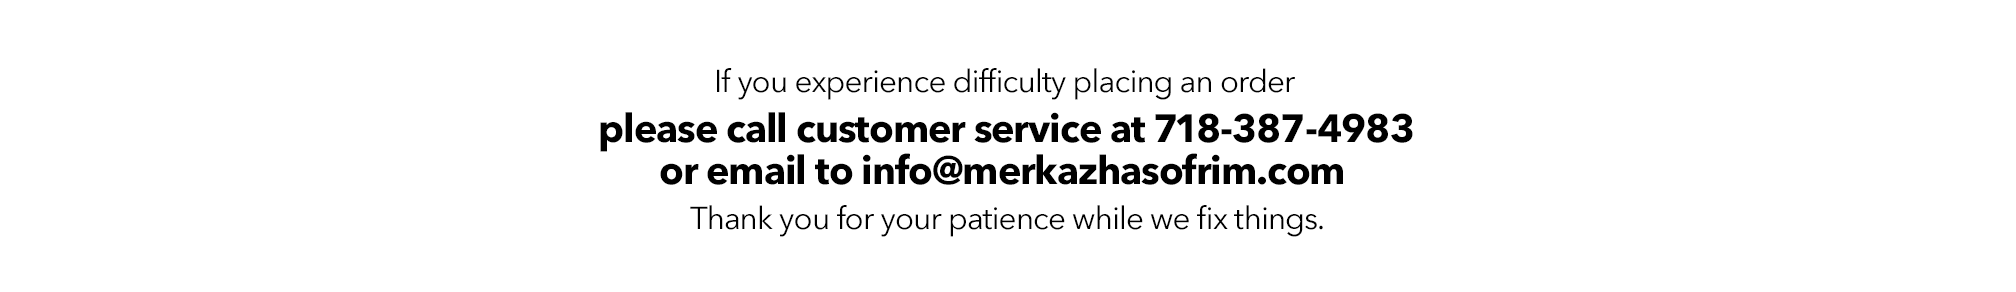 If you experience difficulty placing an order, please call customer service at 718-387-4983.